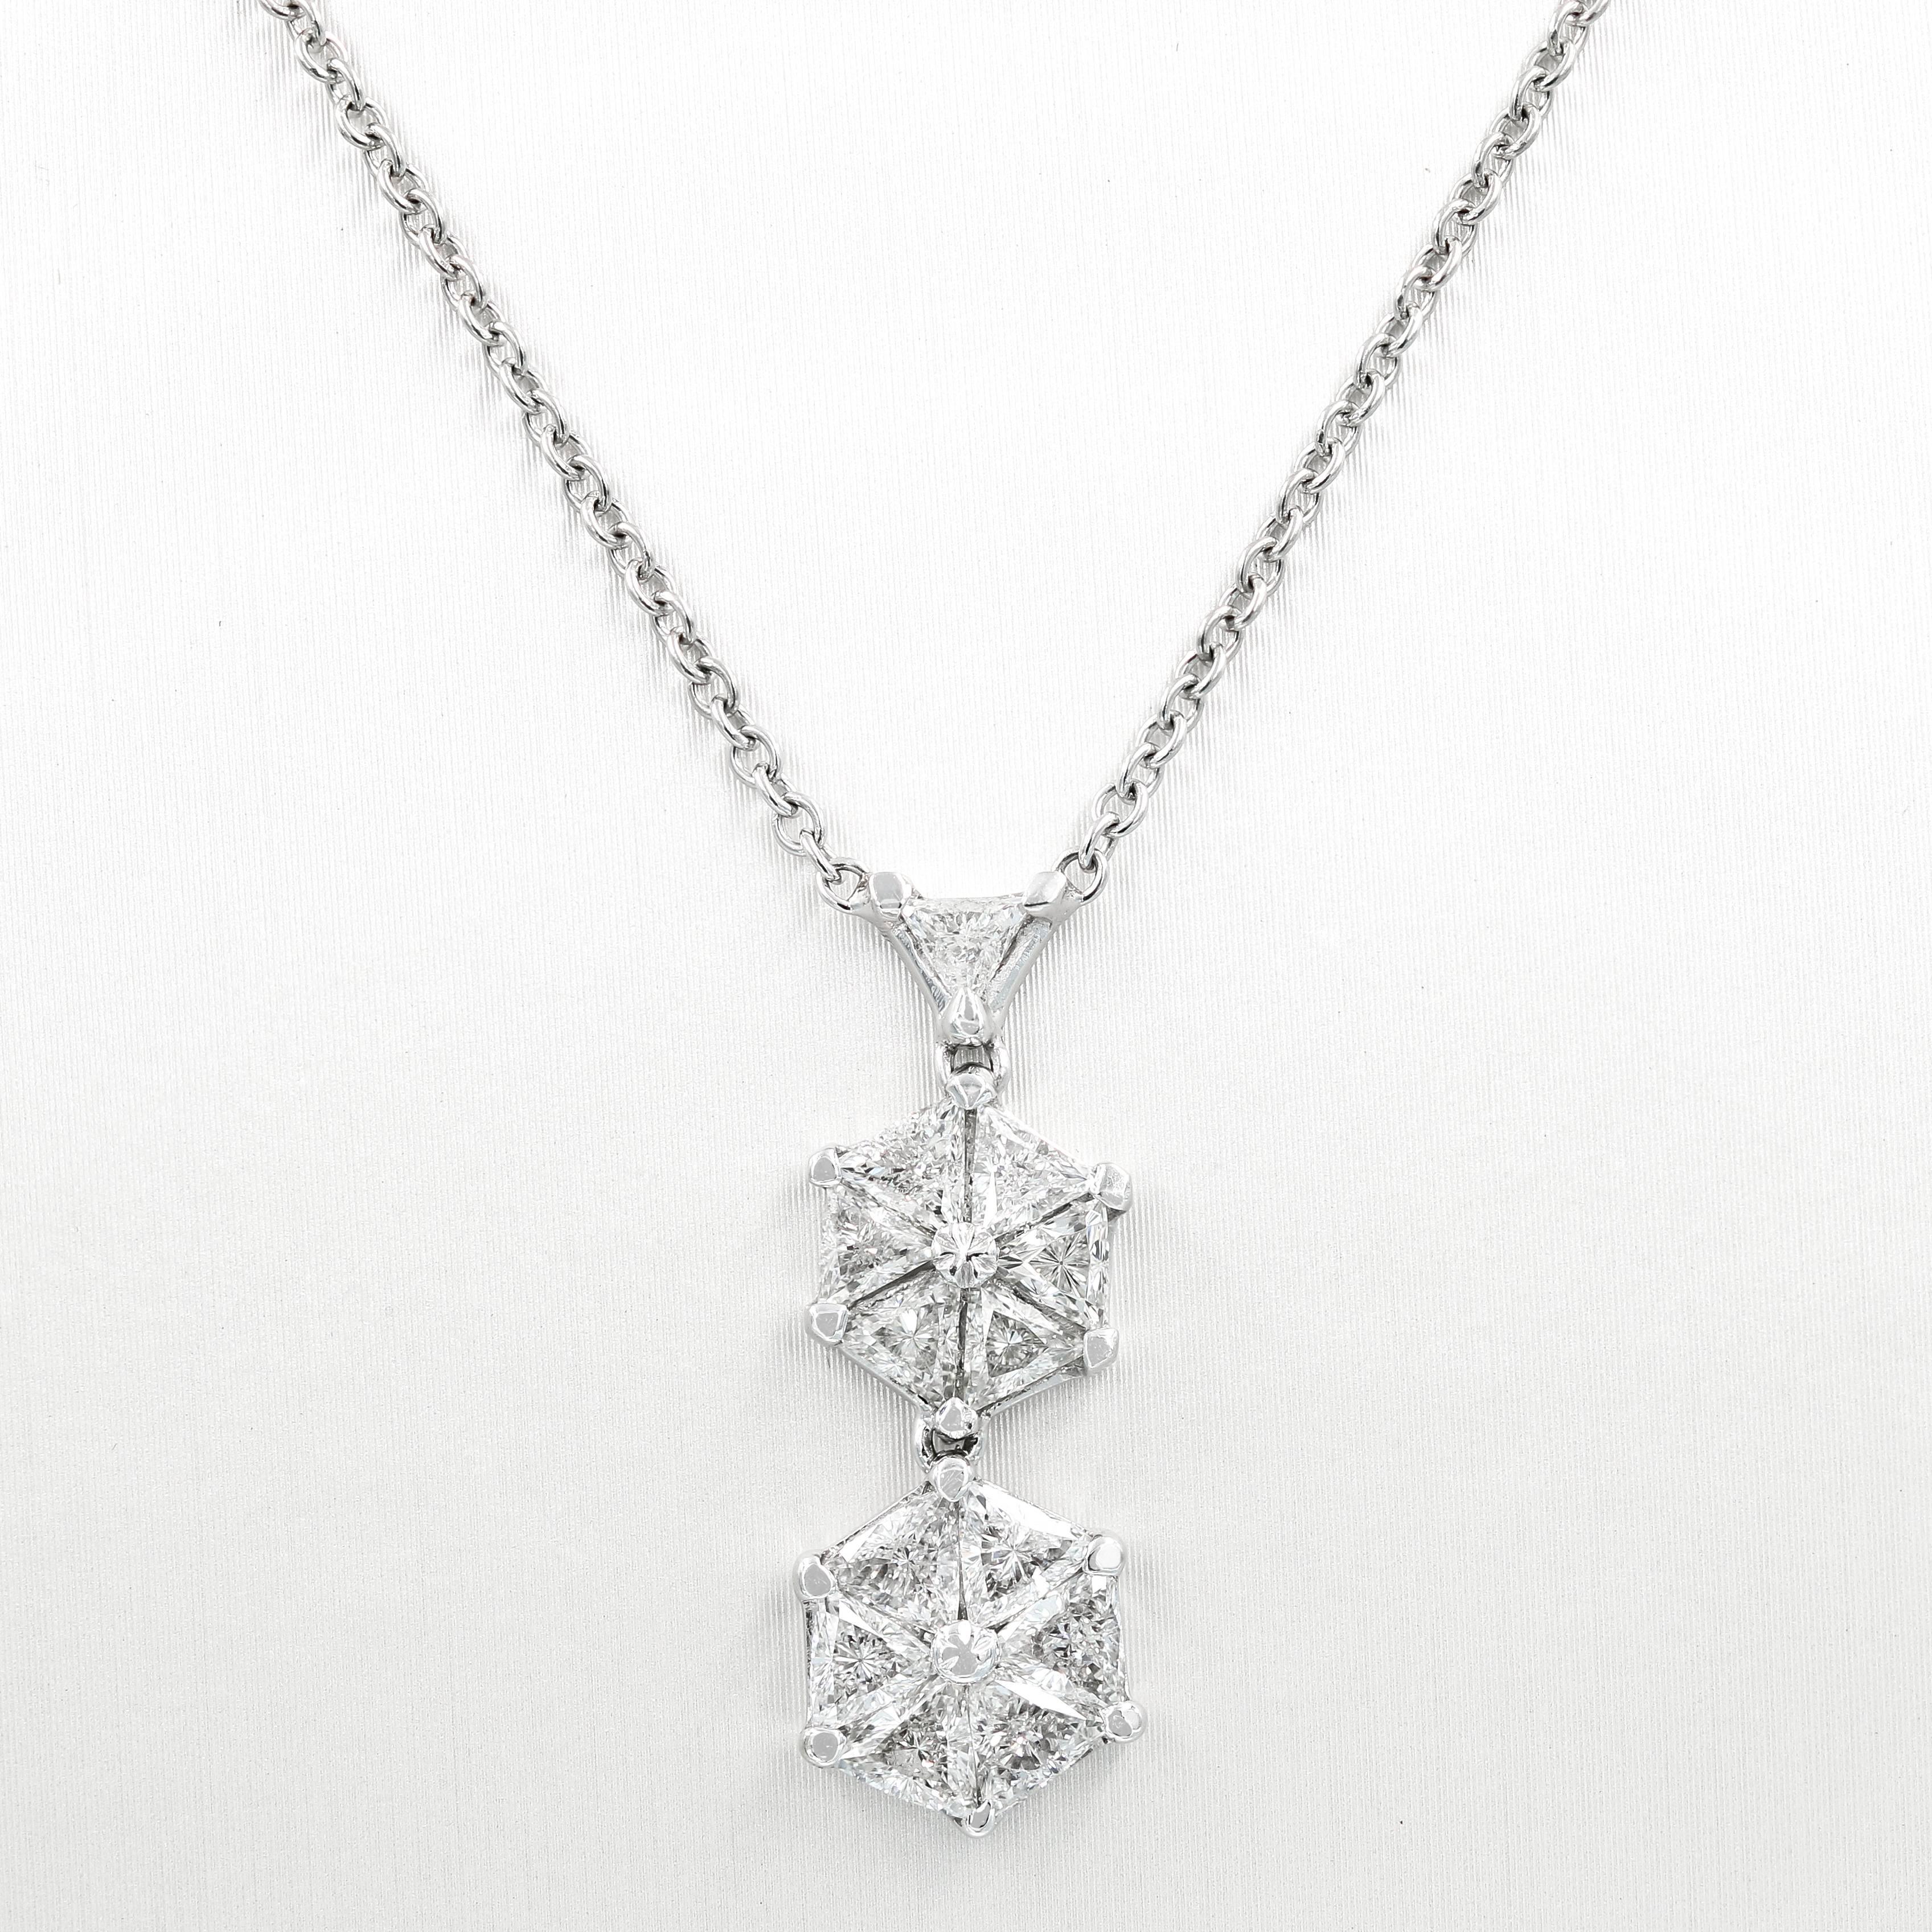 This elegant custom crafted Lester Lampert VoiLLa™ necklace is set in platinum with 13 trilliant cut diamonds = 1.59cts. t.w.  (the diamonds are G in color and VS-SI1 clarity)

The piece is suspended from a 16